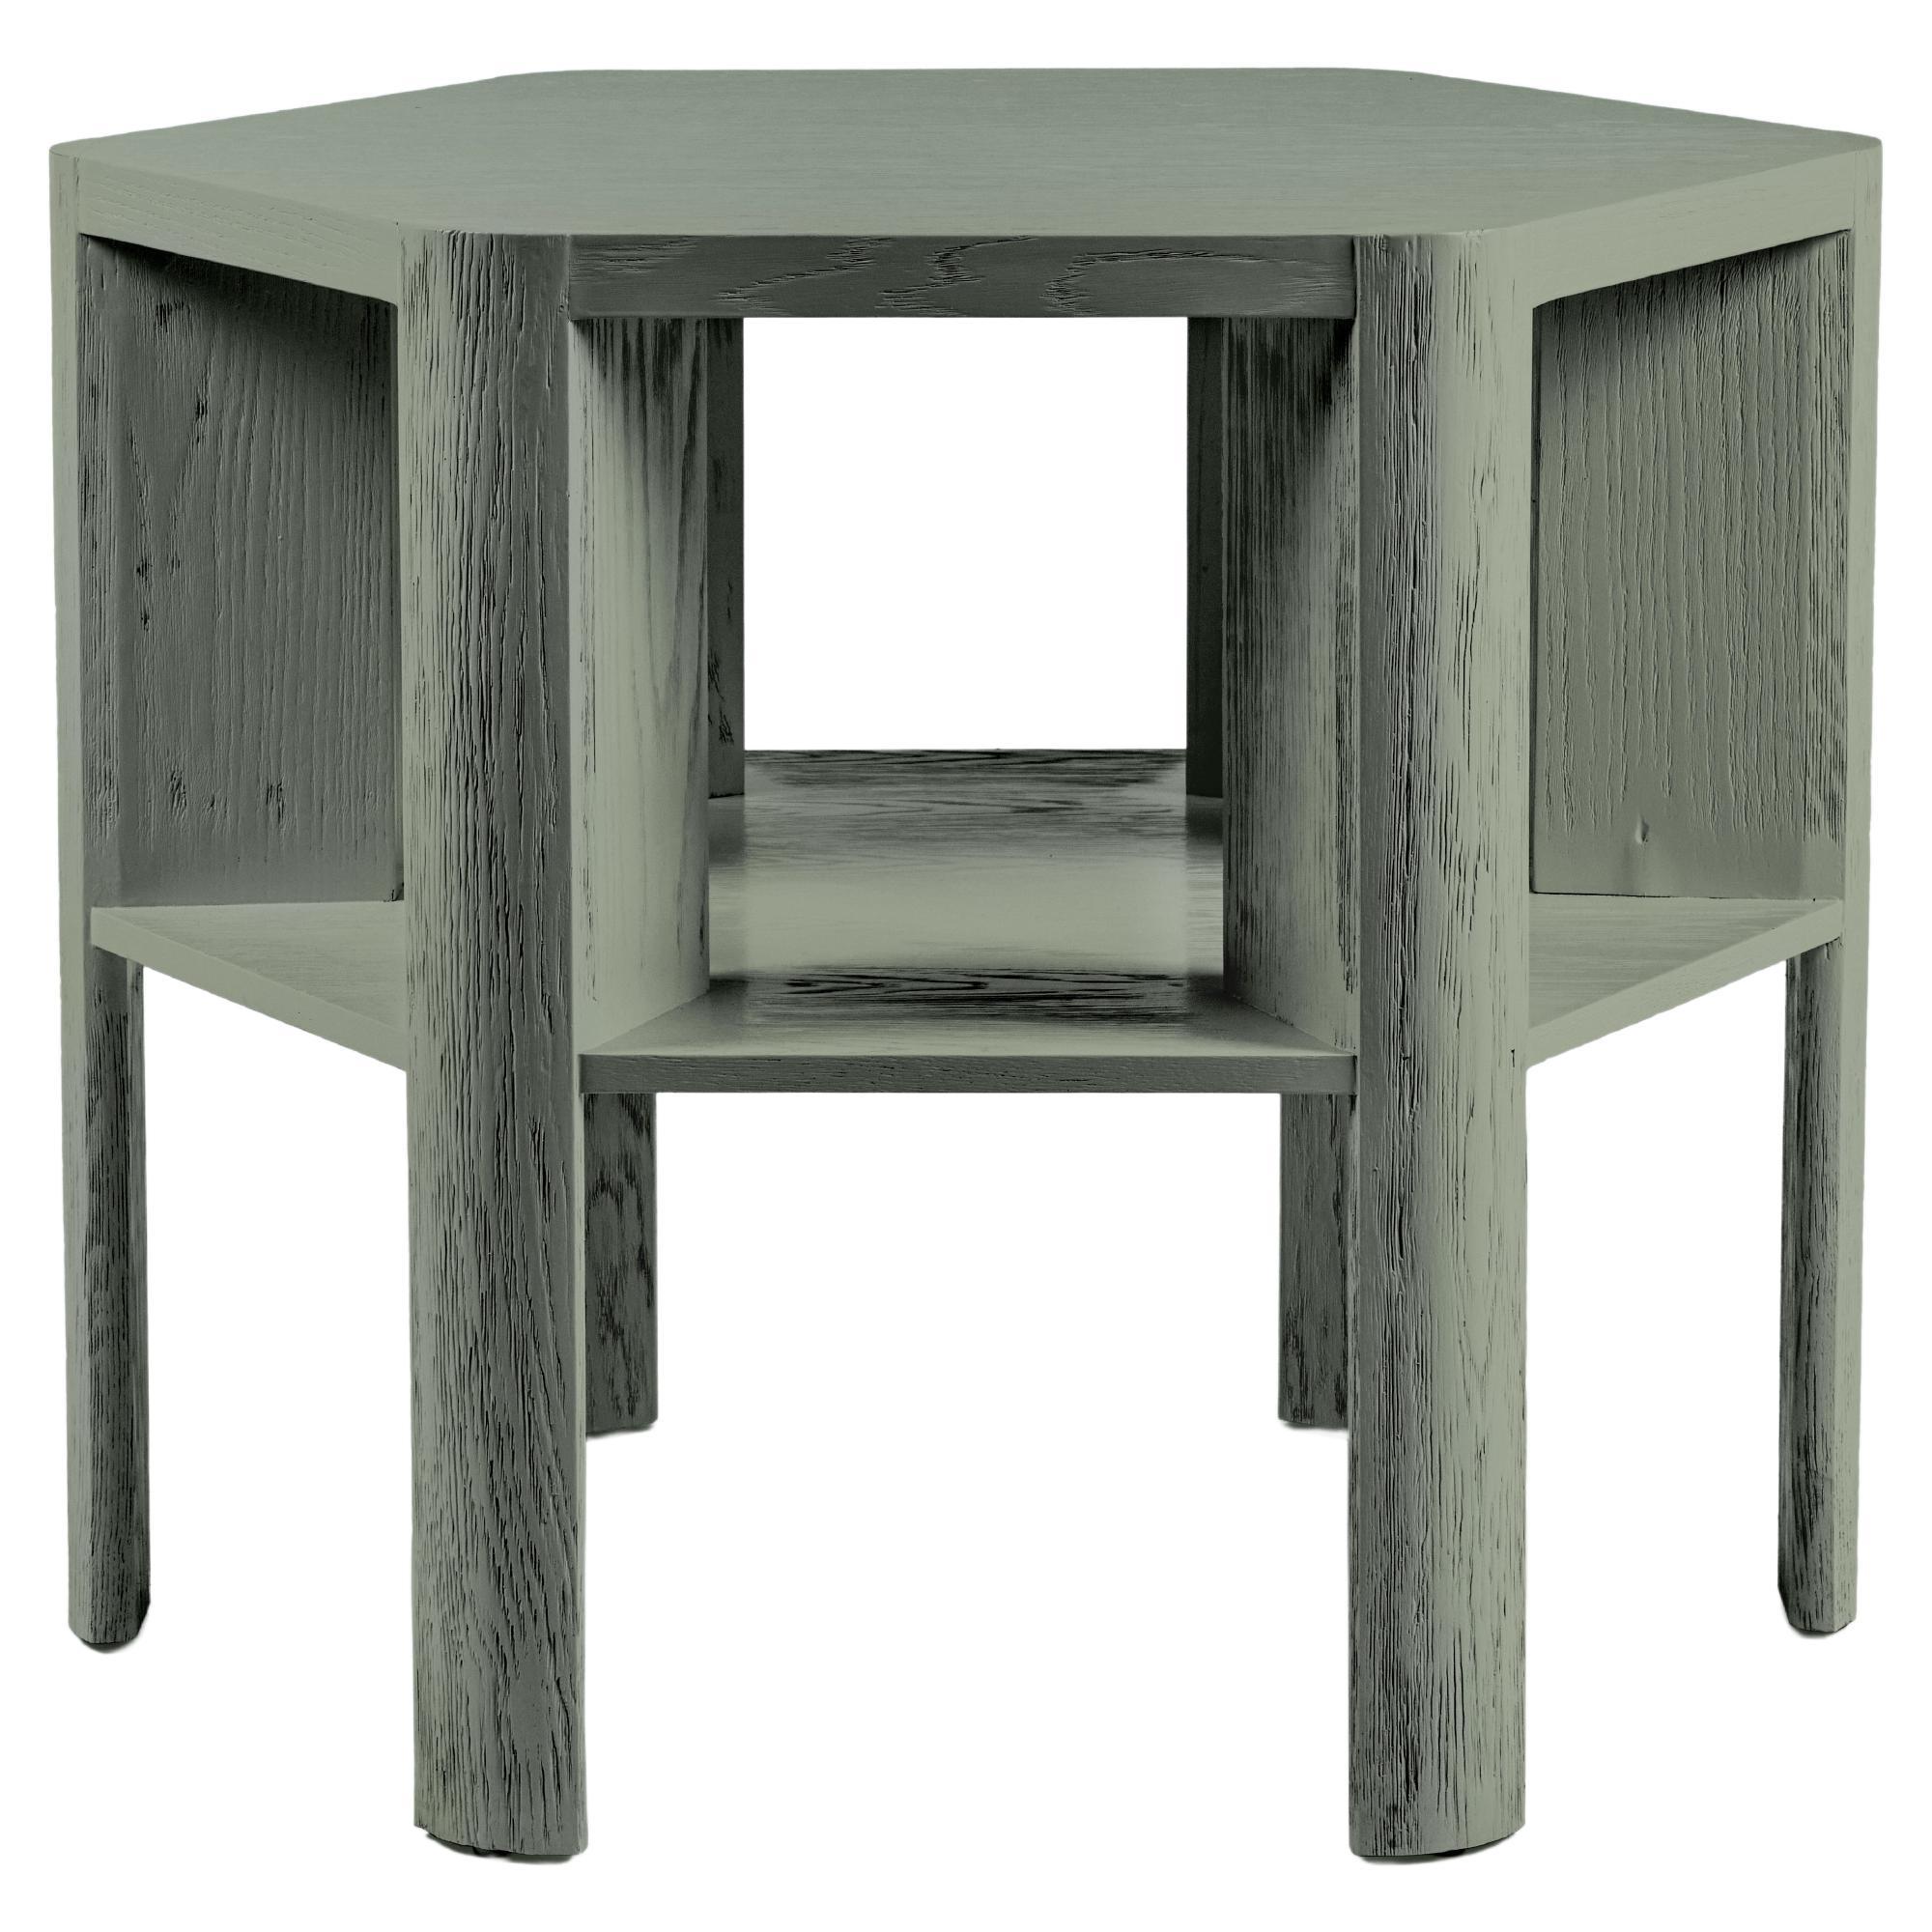 Minimalist Modern Lacquered Library Table Shown in Lichen on Oak